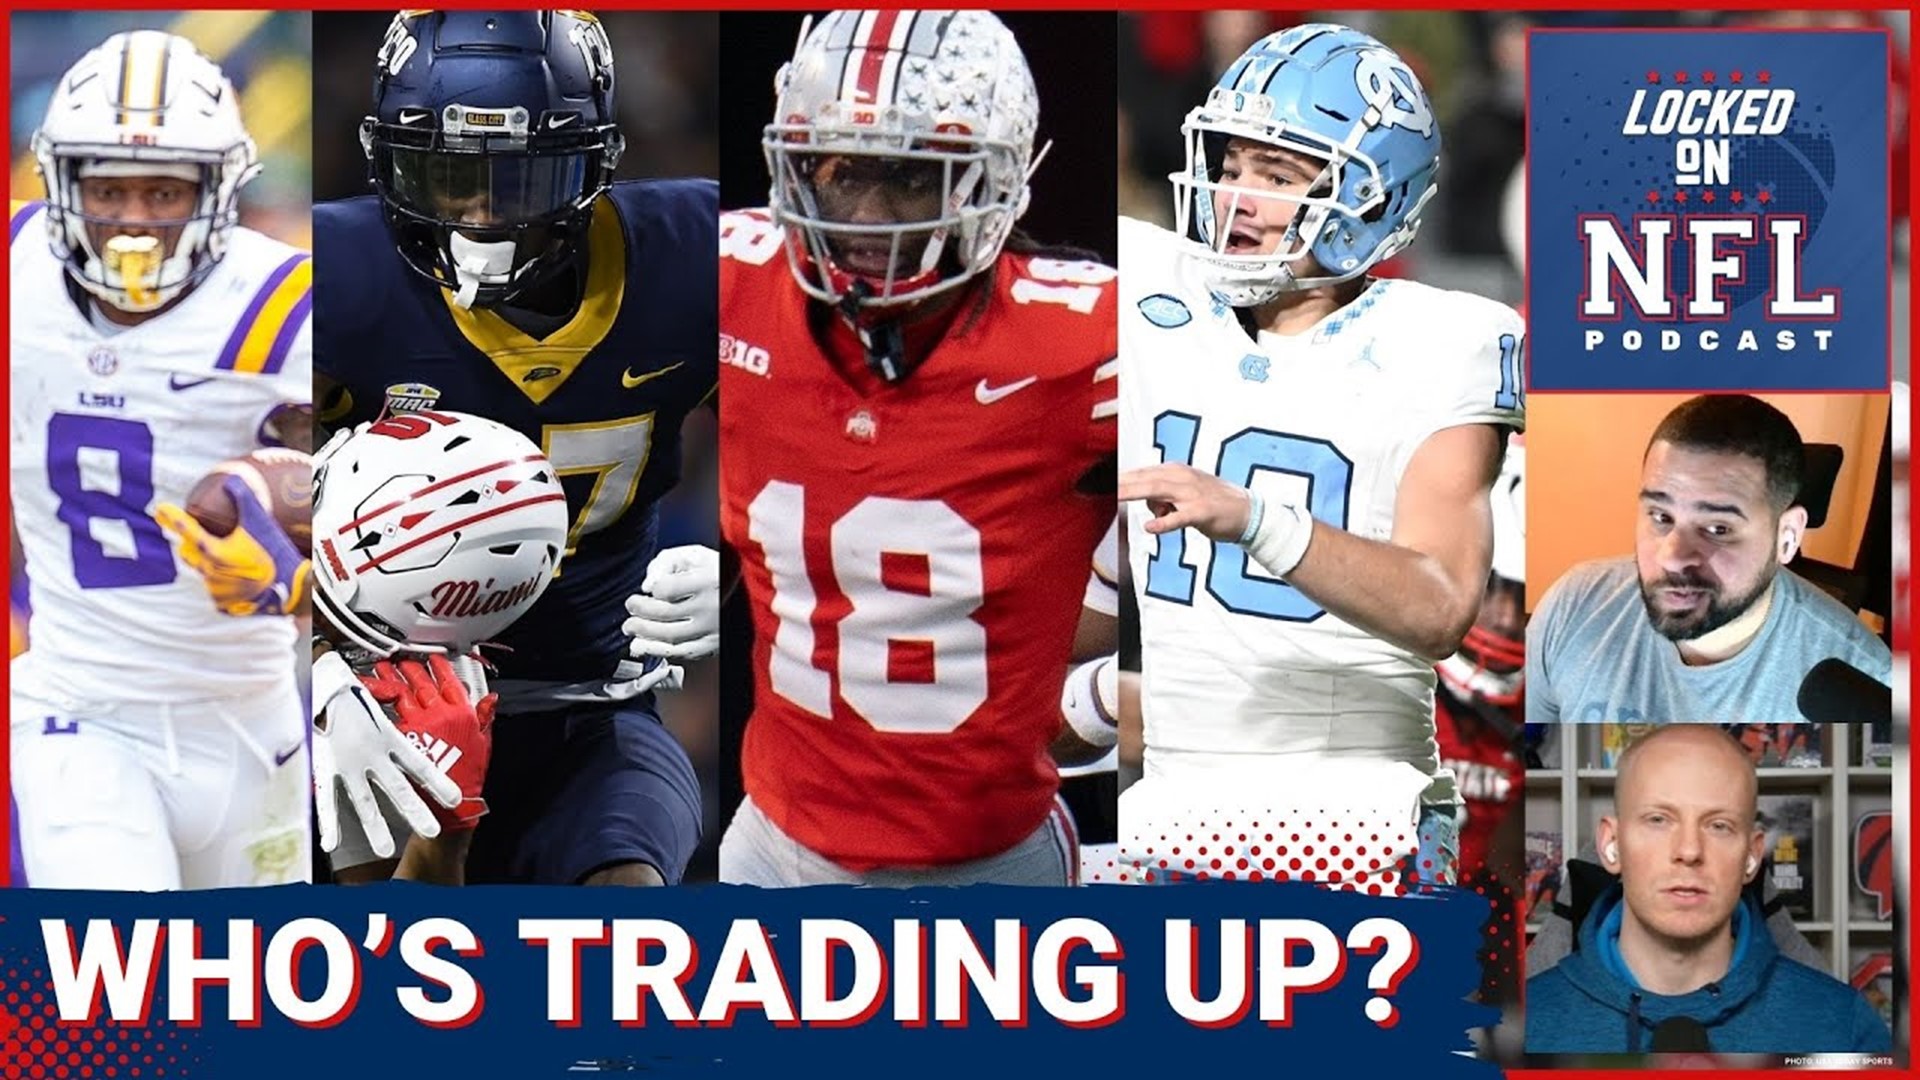 The NFL Draft is approaching, but which teams are most likely to make big trades in the first round? Chris Carter and James Rapien discuss